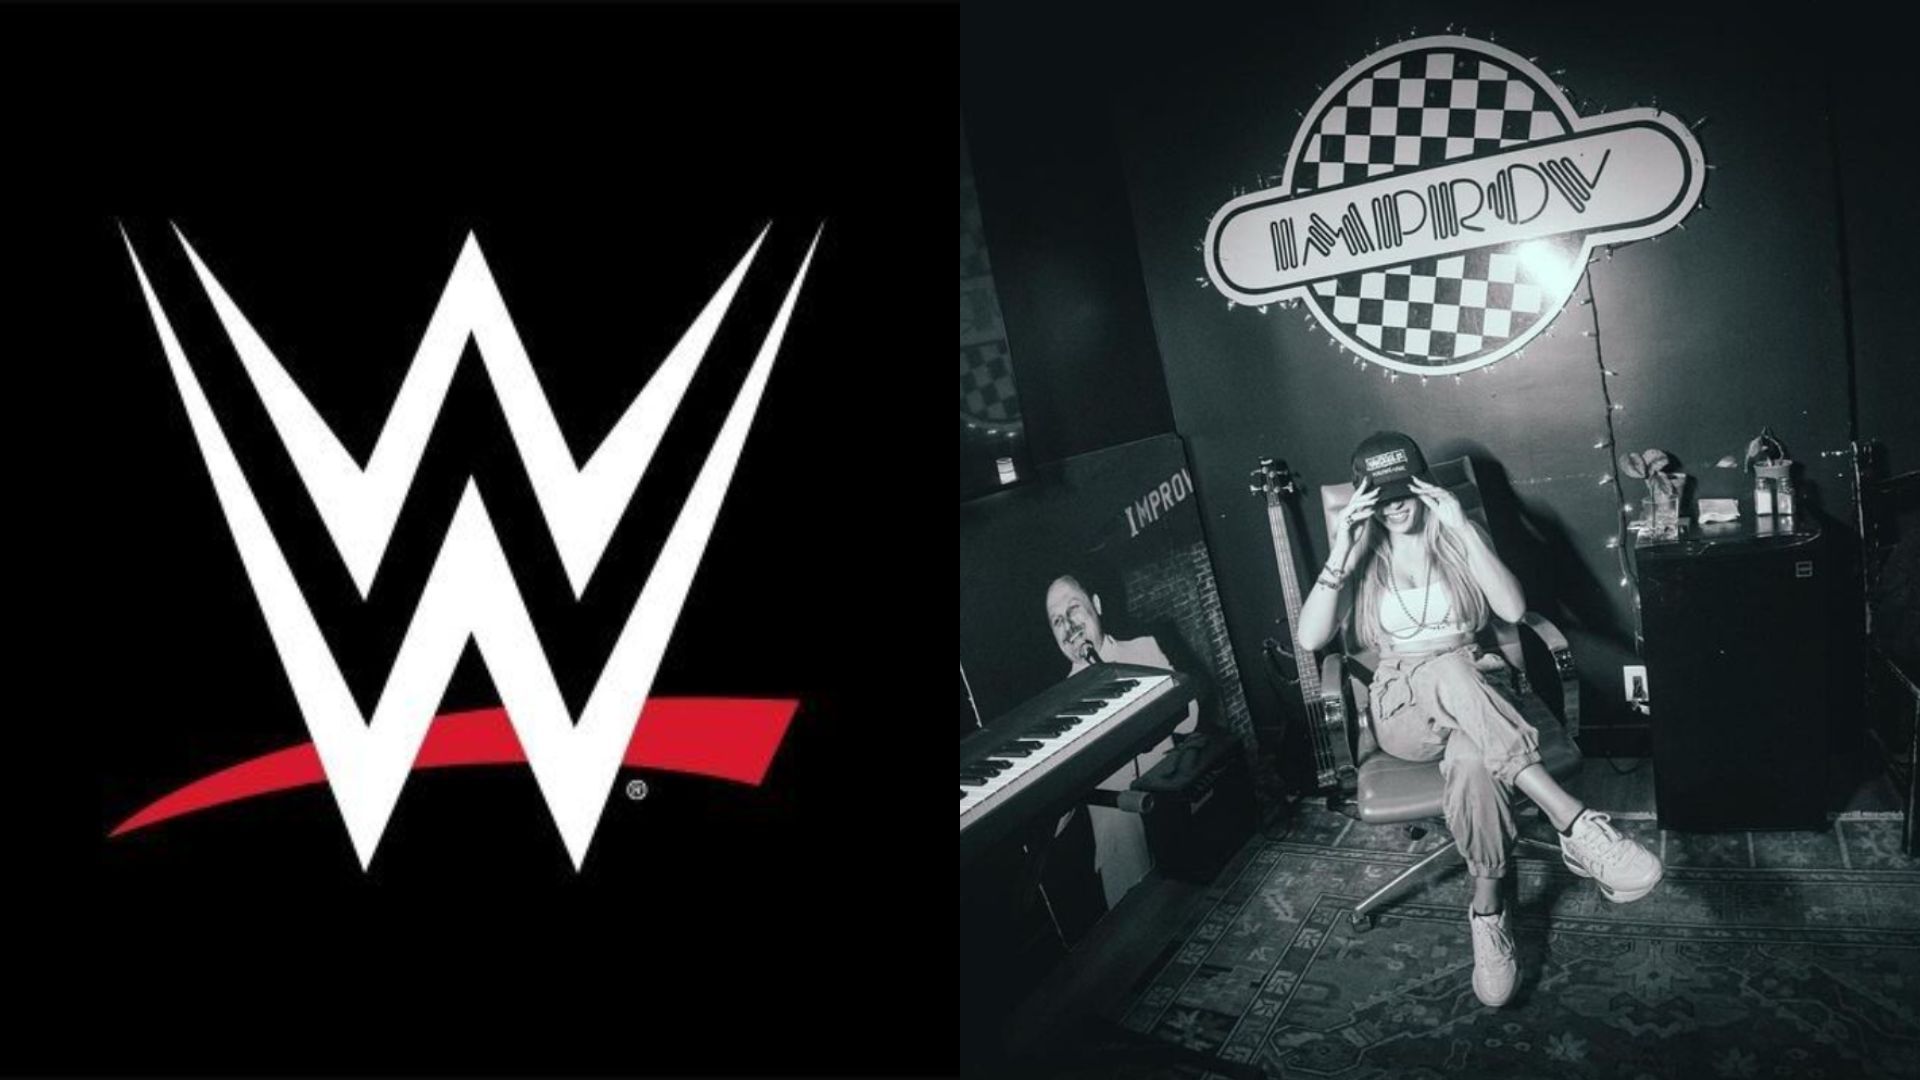 The star has been with WWE for several years (Image credits: WWE on X and the star